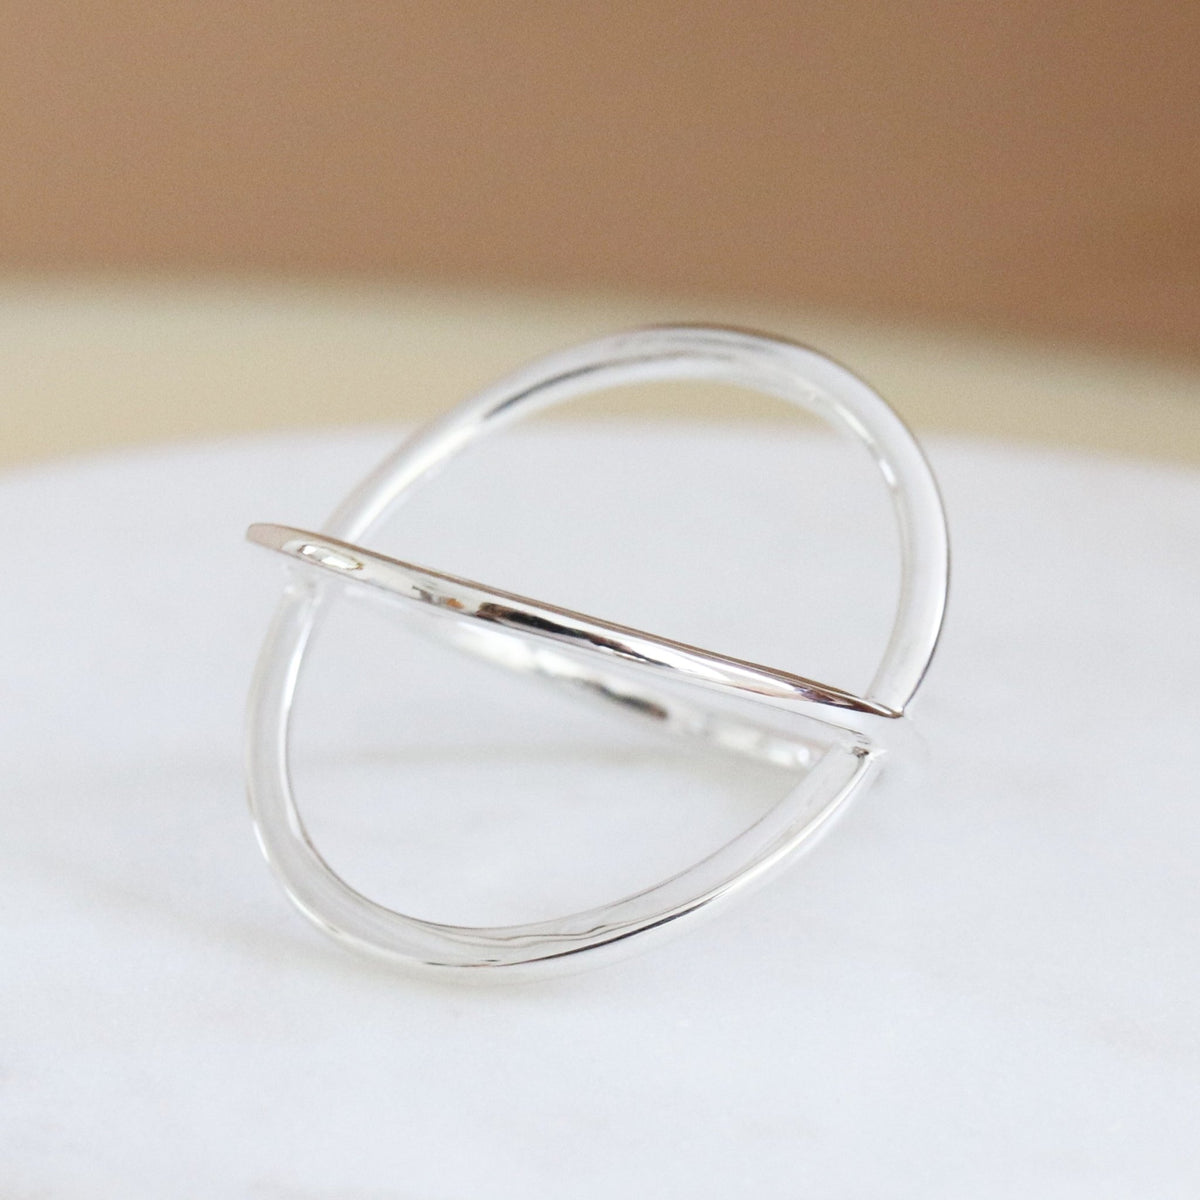 POISE CROSSED BAR RING - SILVER - SO PRETTY CARA COTTER